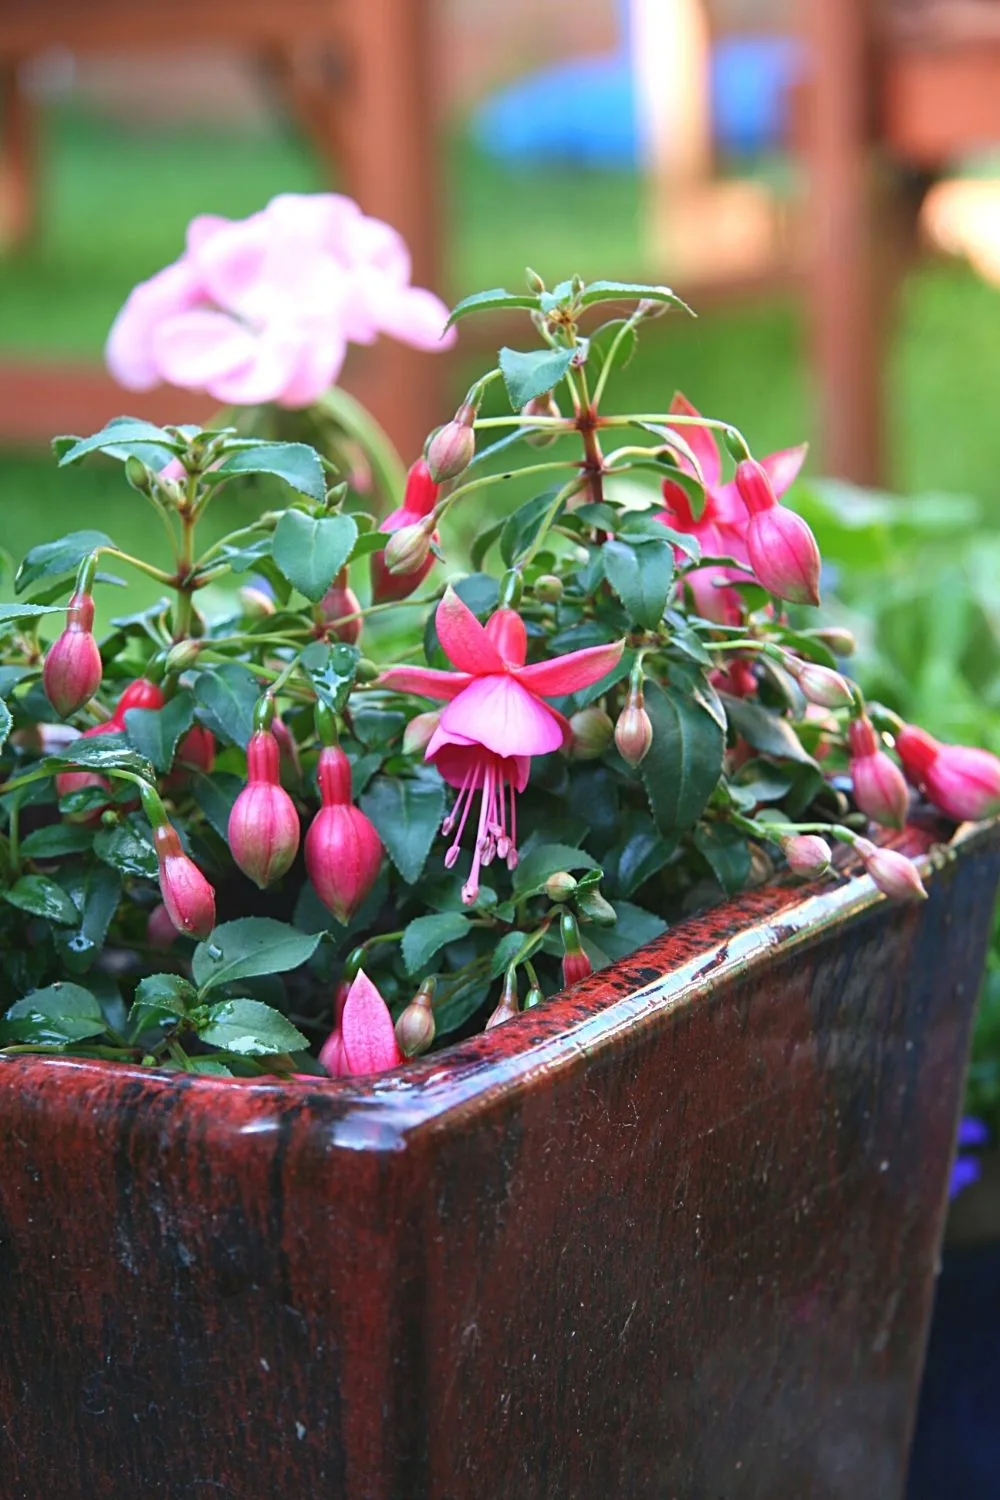 Though it's a common ground plant, Fuchsia can also be grown on a west-facing balcony